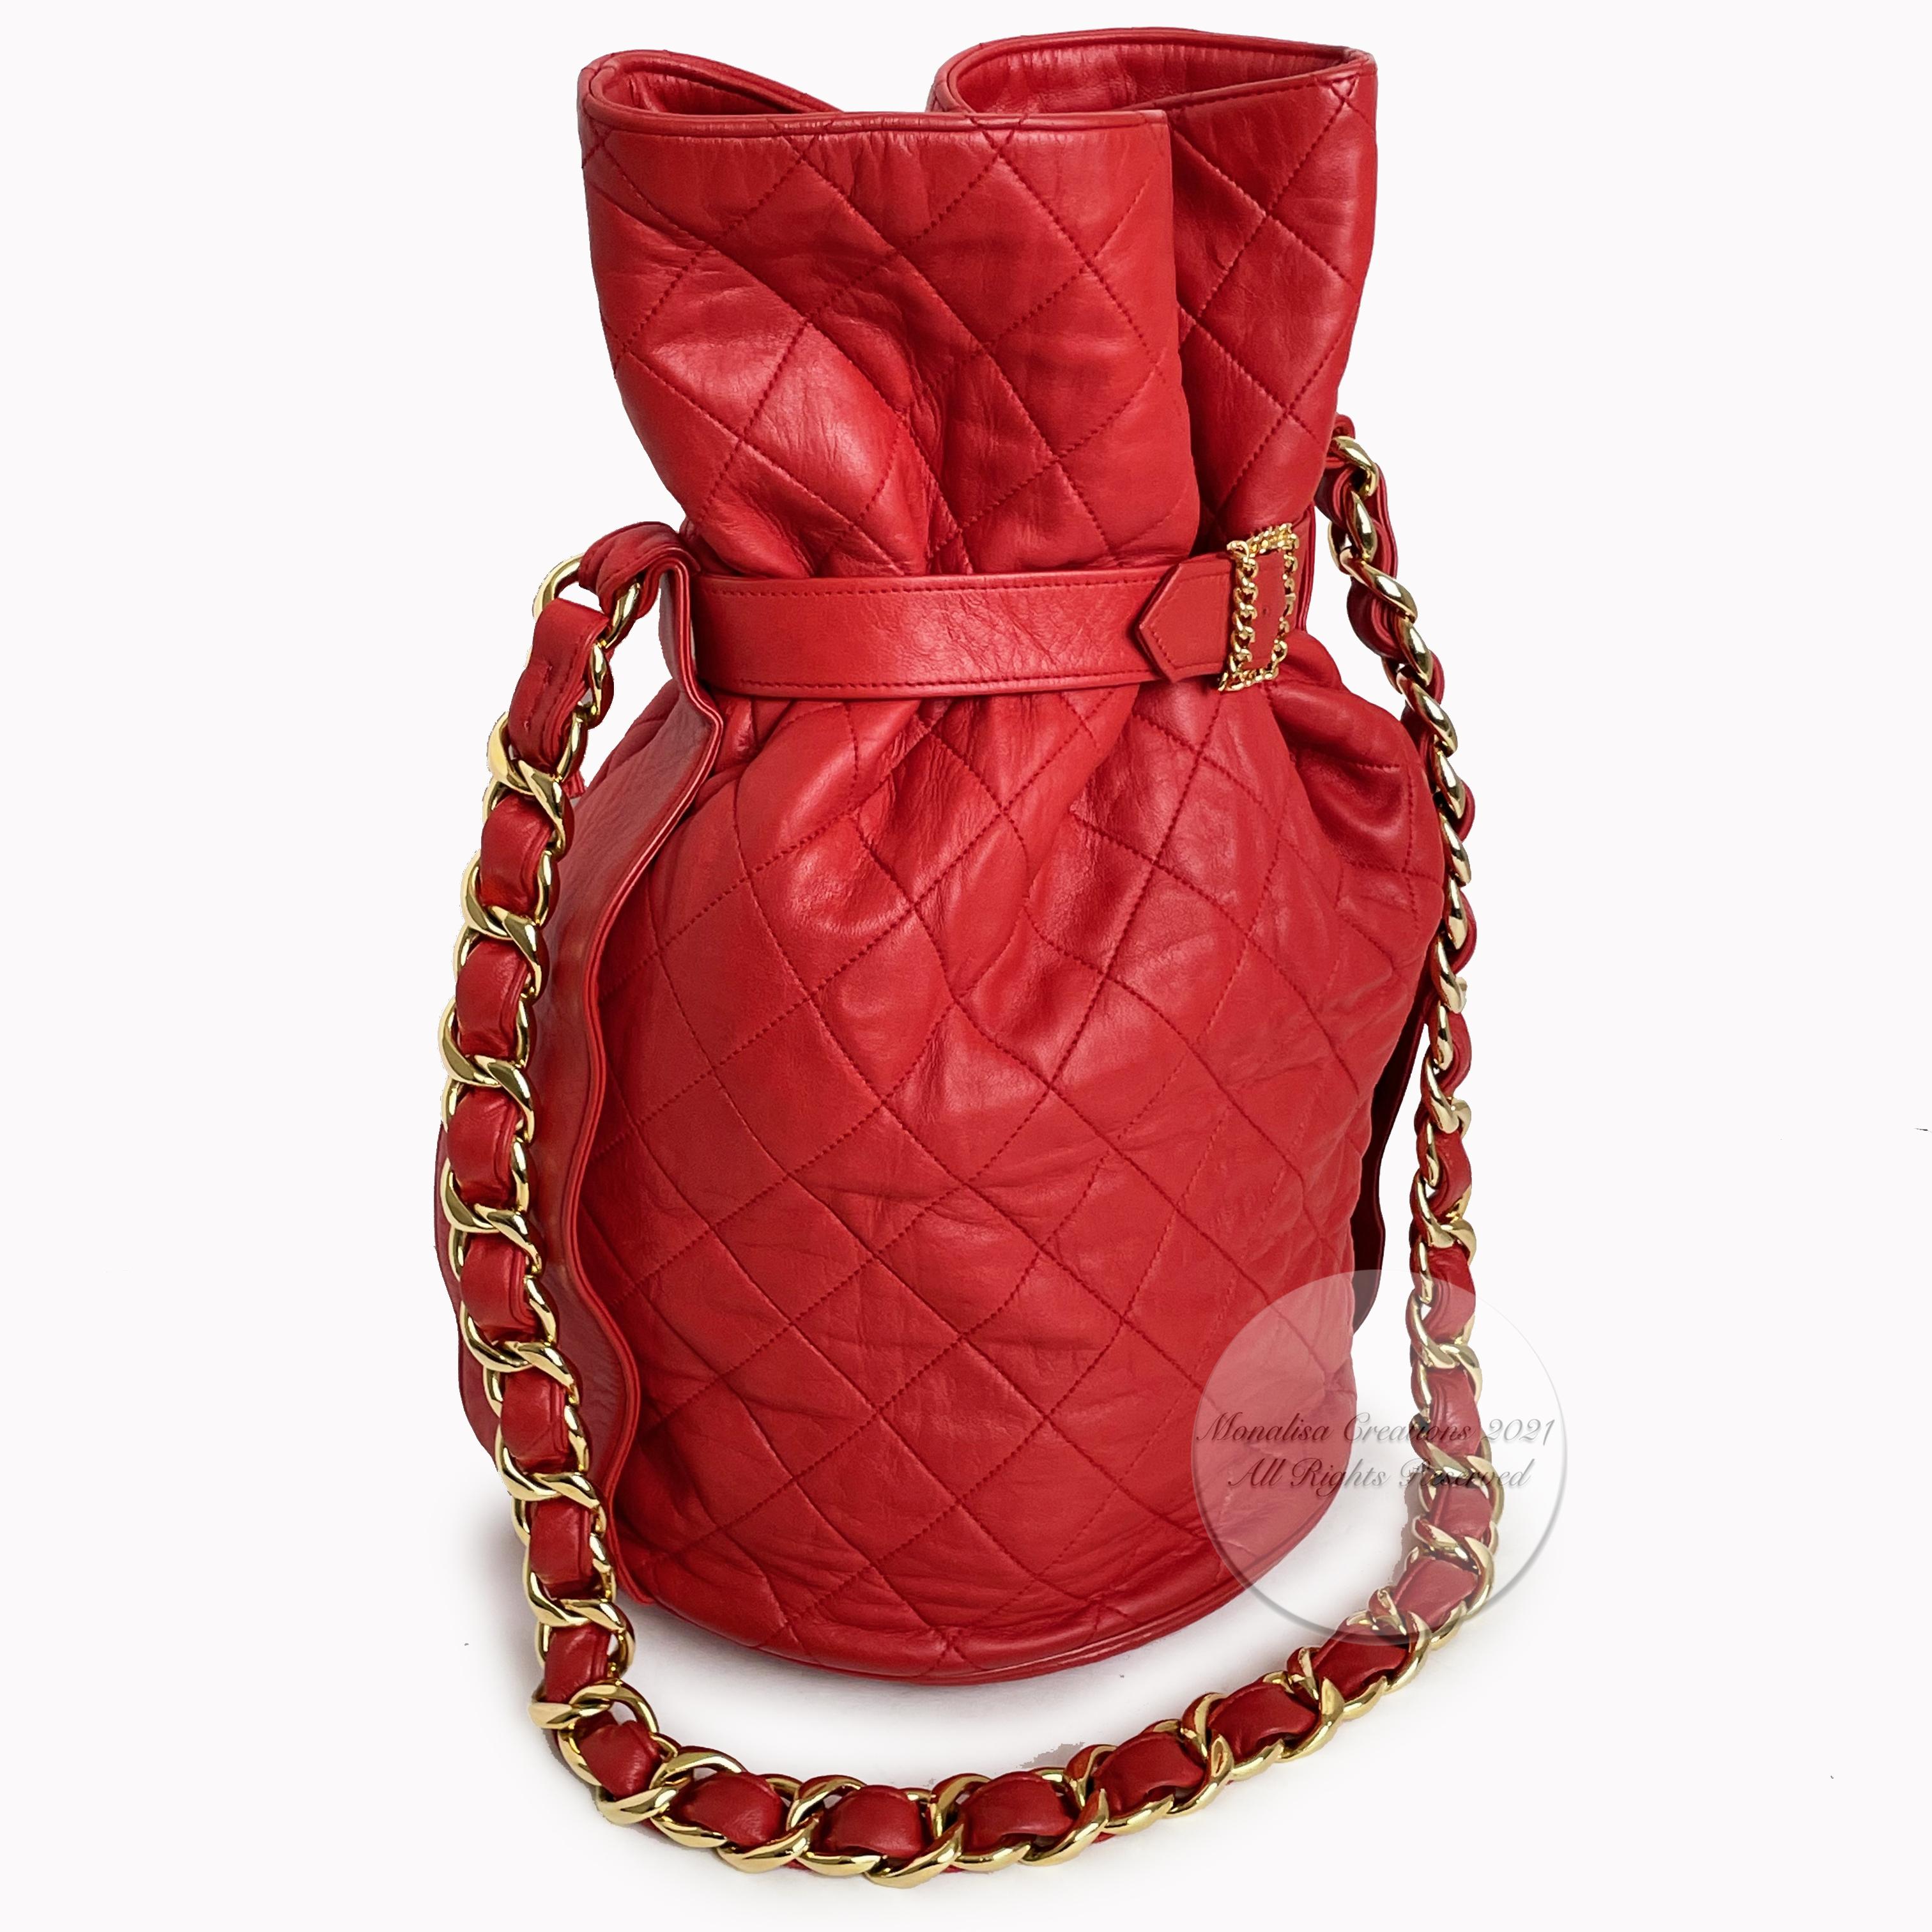 Authentic, preowned, vintage Chanel Buckle Bag with chain strap in red matelasse leather, circa the 90s.  Incredibly rare bag in an equally hard to find color.  If you search old videos of the Chanel Fall/Winter '92 RTW collection, you'll see this